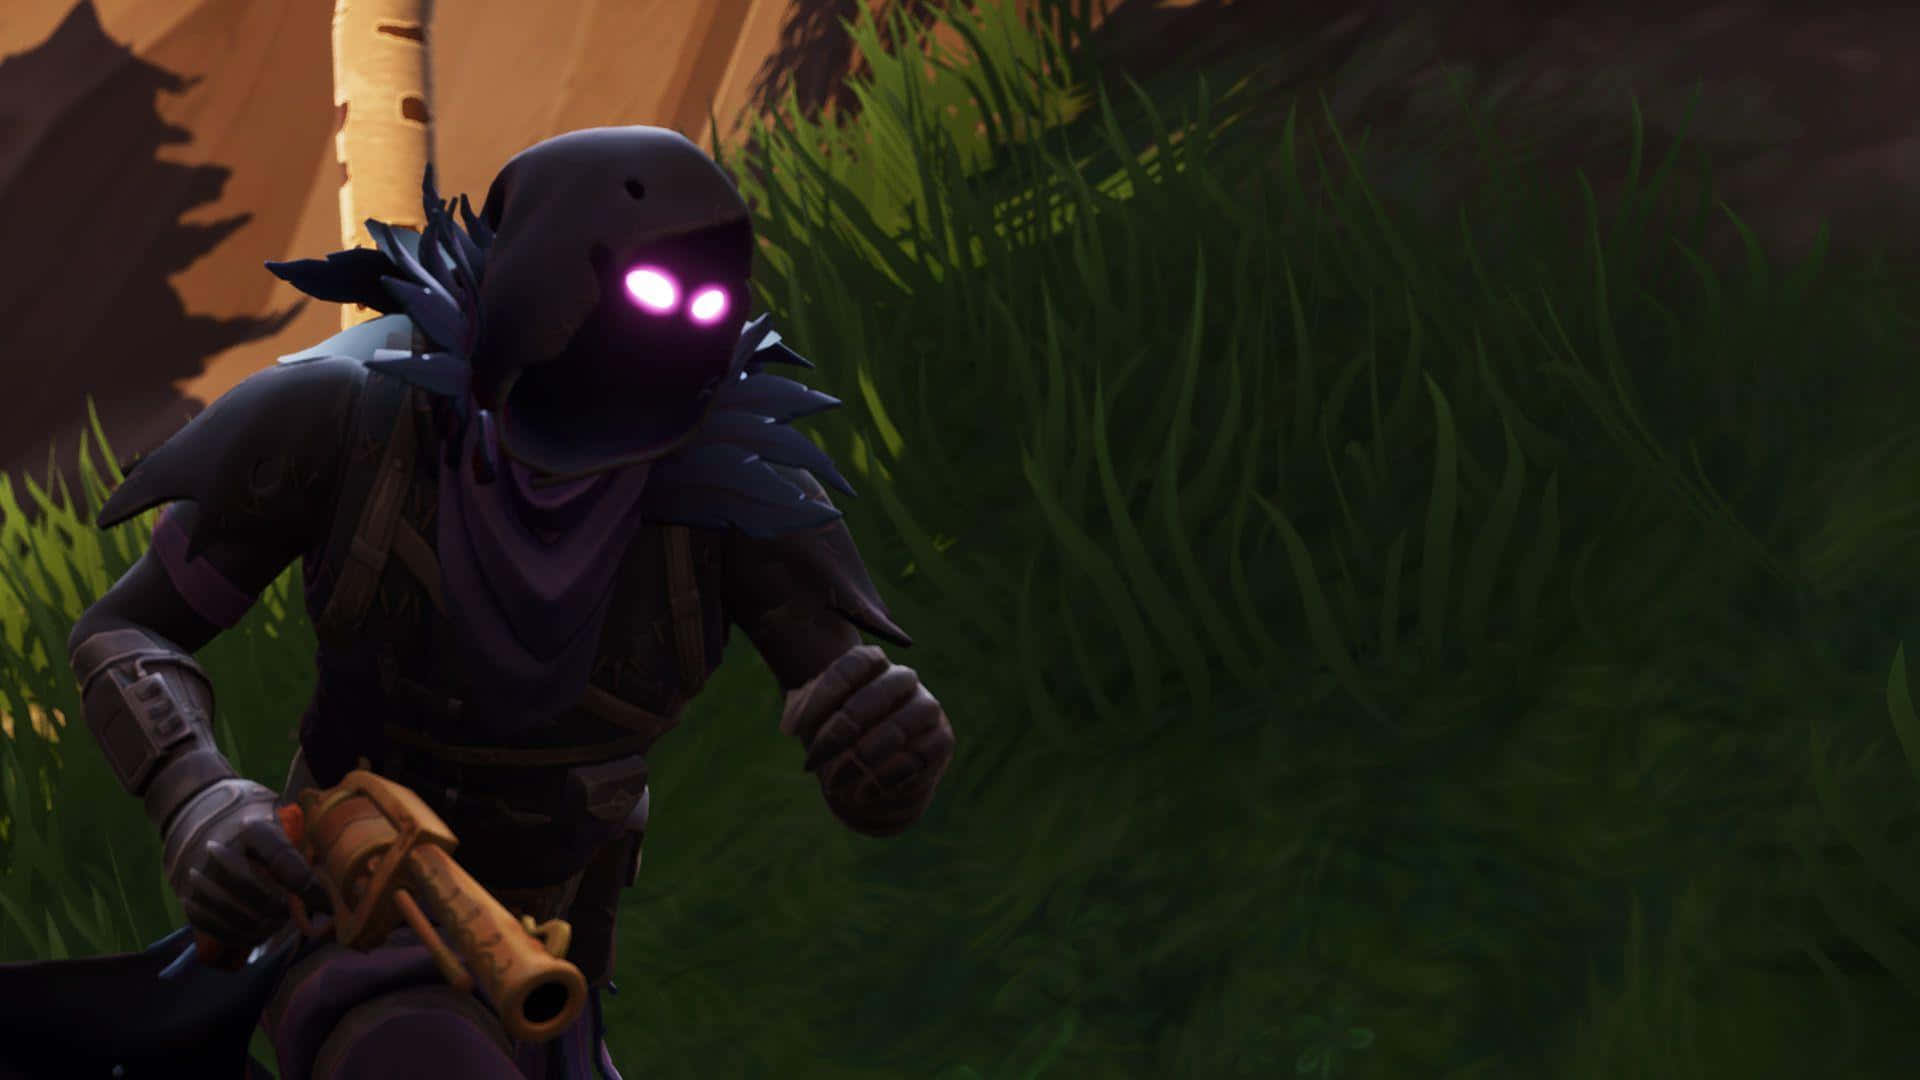 Unleash the power of Raven - Conquer your enemies in Fortnite! Wallpaper